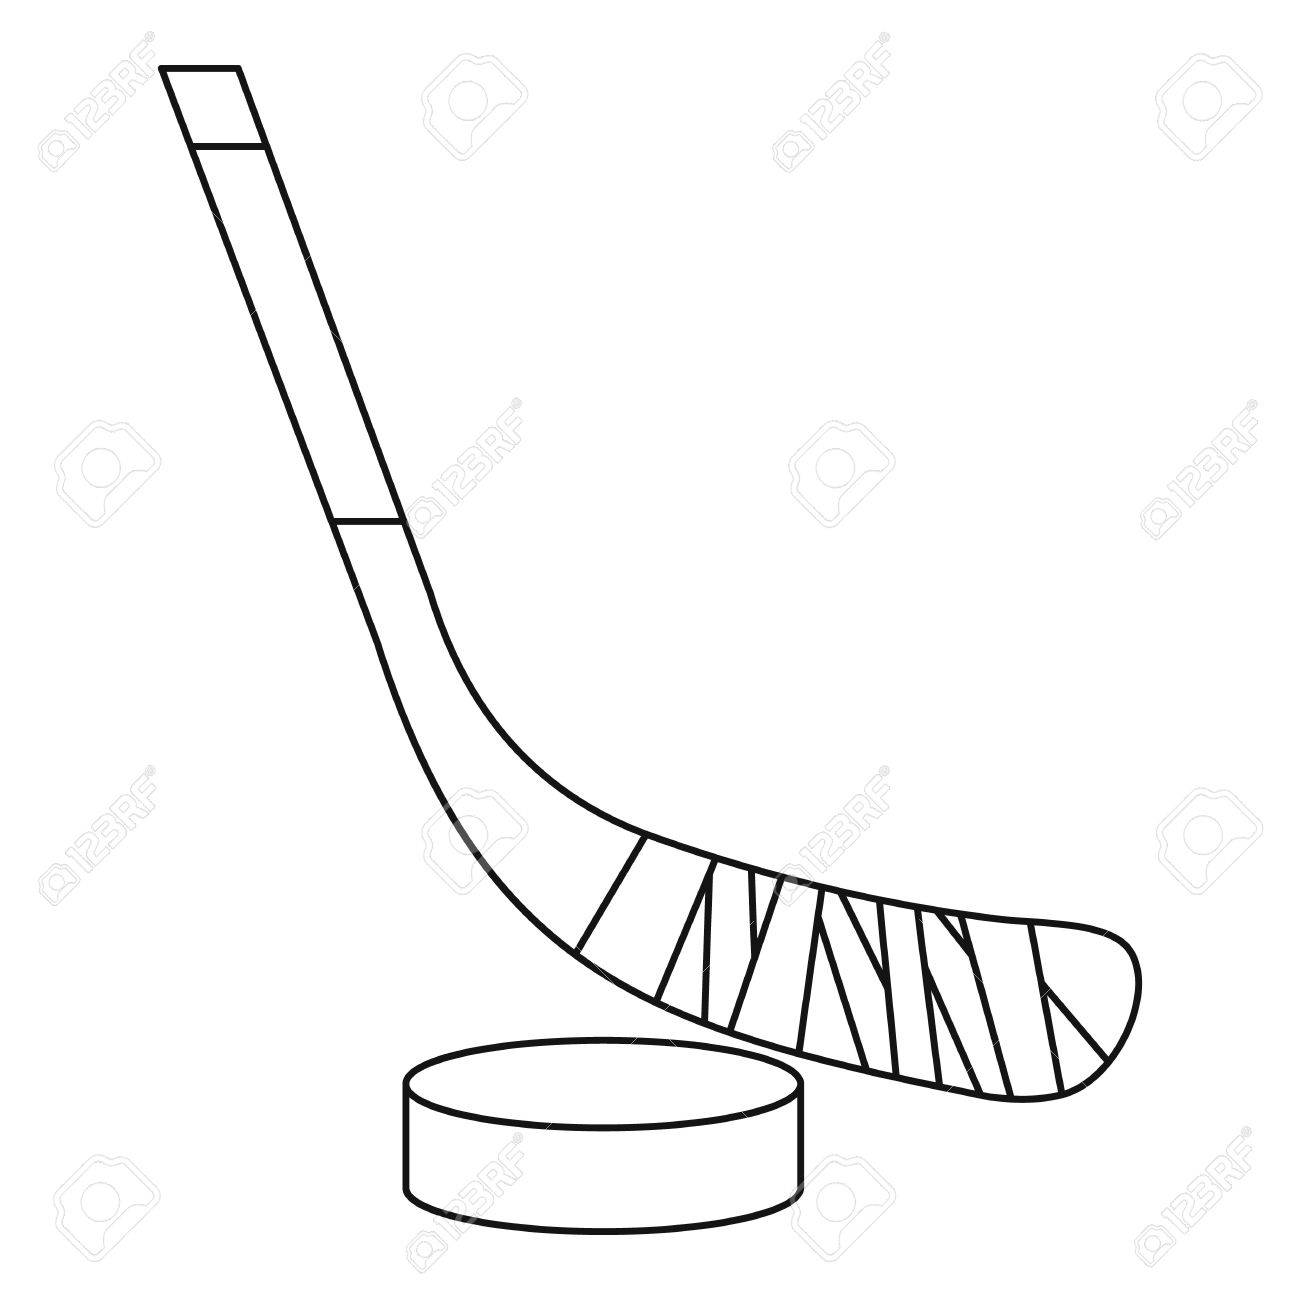 How To Draw A Hockey Stick And Puck Step By Step